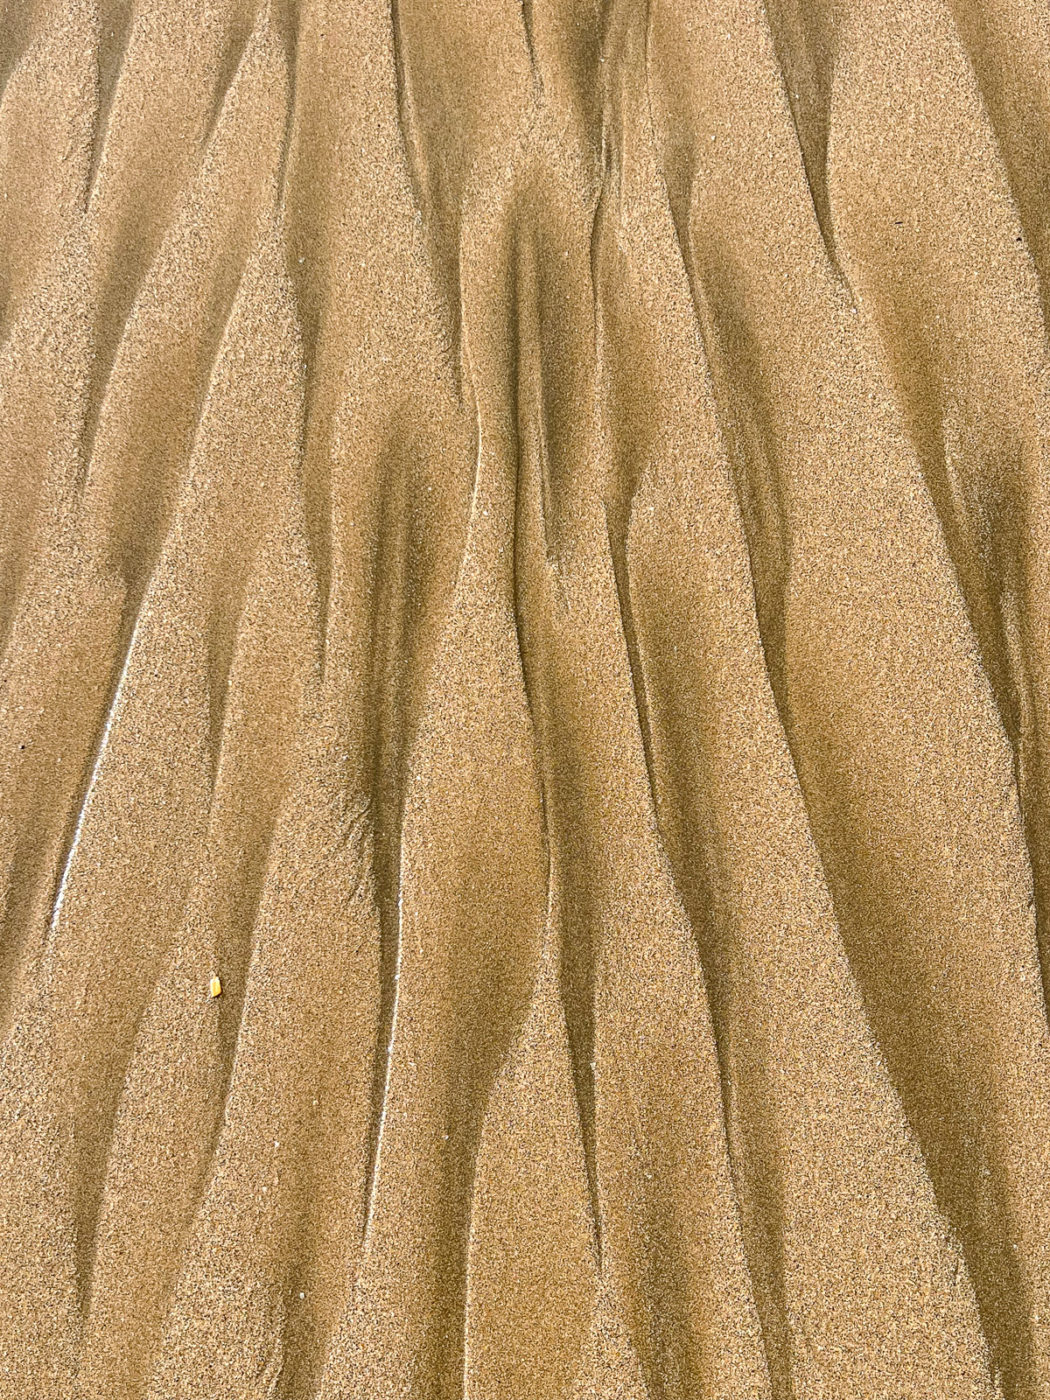 sand patterns on the beach on the Nayarit coast of Mexico